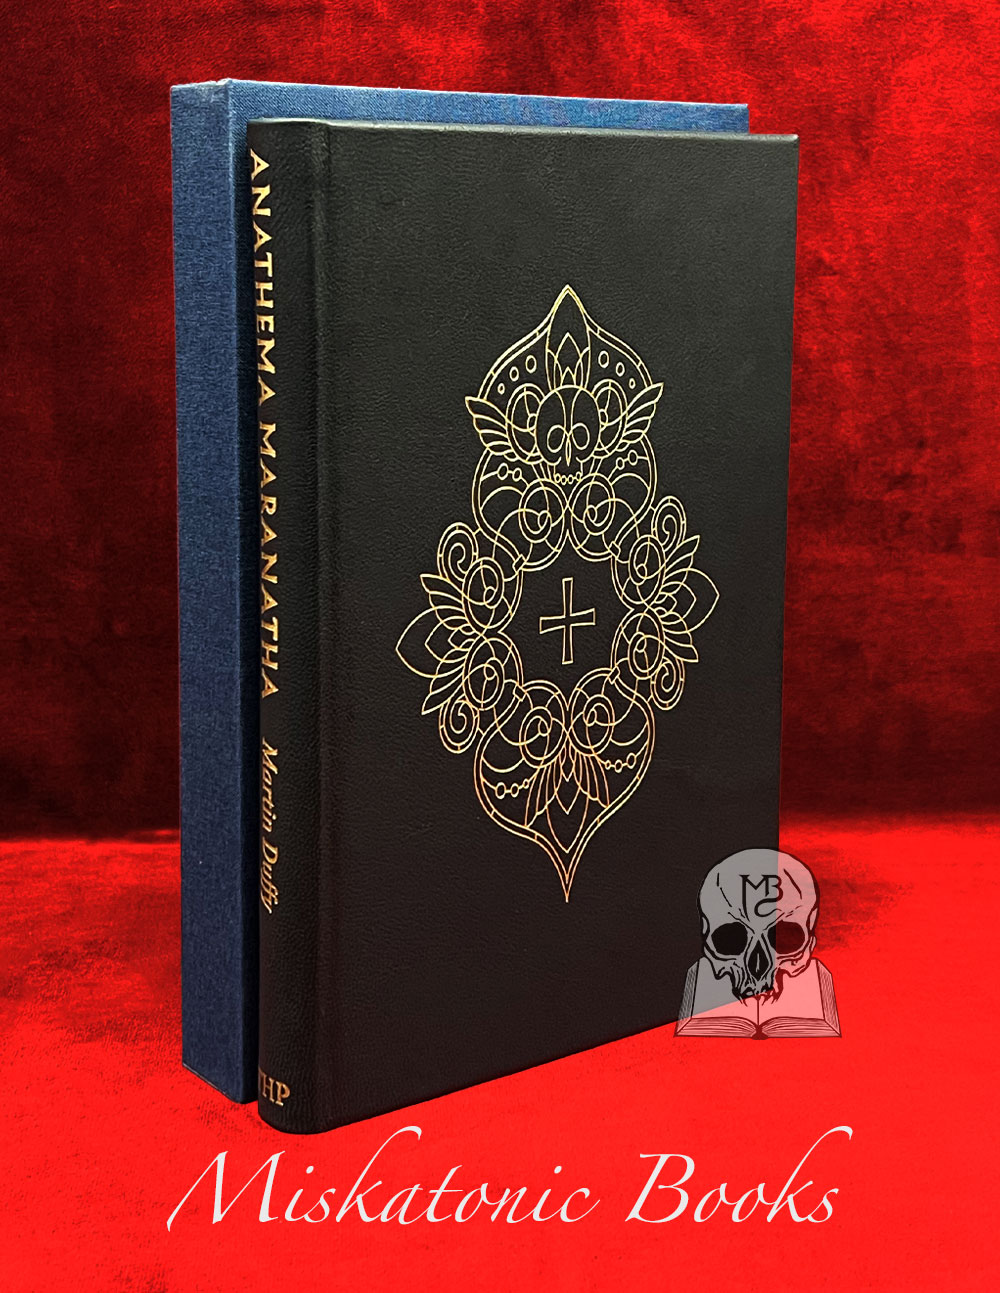 ANATHEMA MARANATHA: Christianity and the Imprecatory Arts by Martin Duffy - Deluxe Special Limited Edition Hardcover Bound in Goat with Custom Slipcase